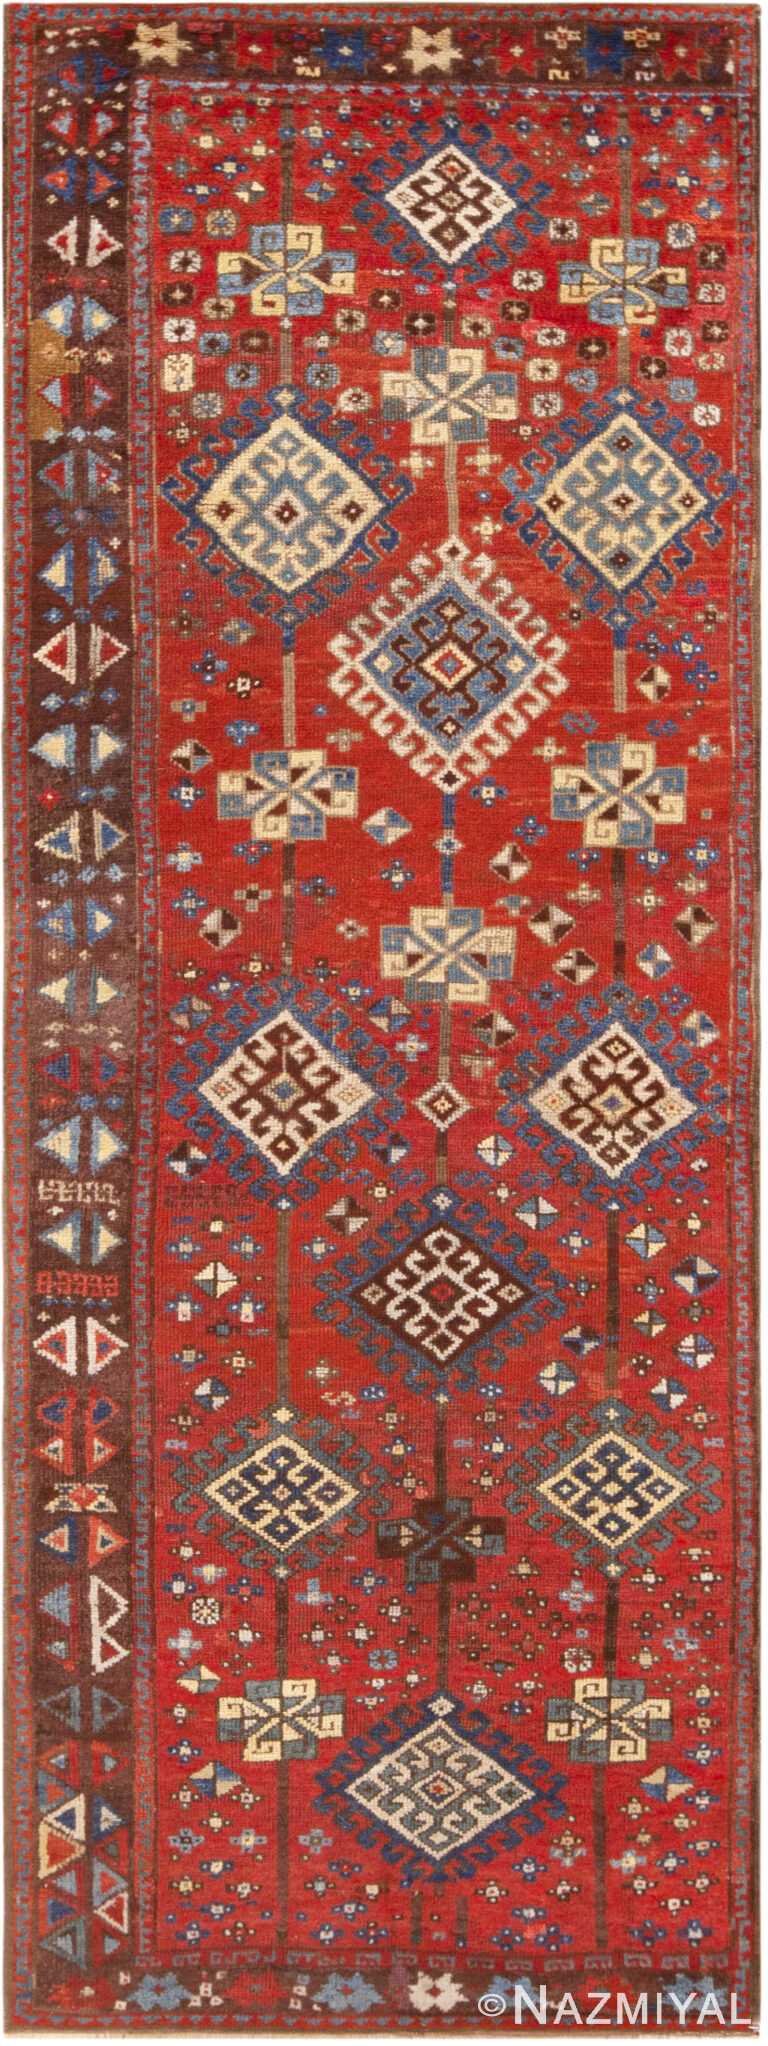 Tribal Antique Central Anatolian Runner Rug 72598 by Nazmiyal Antique Rugs